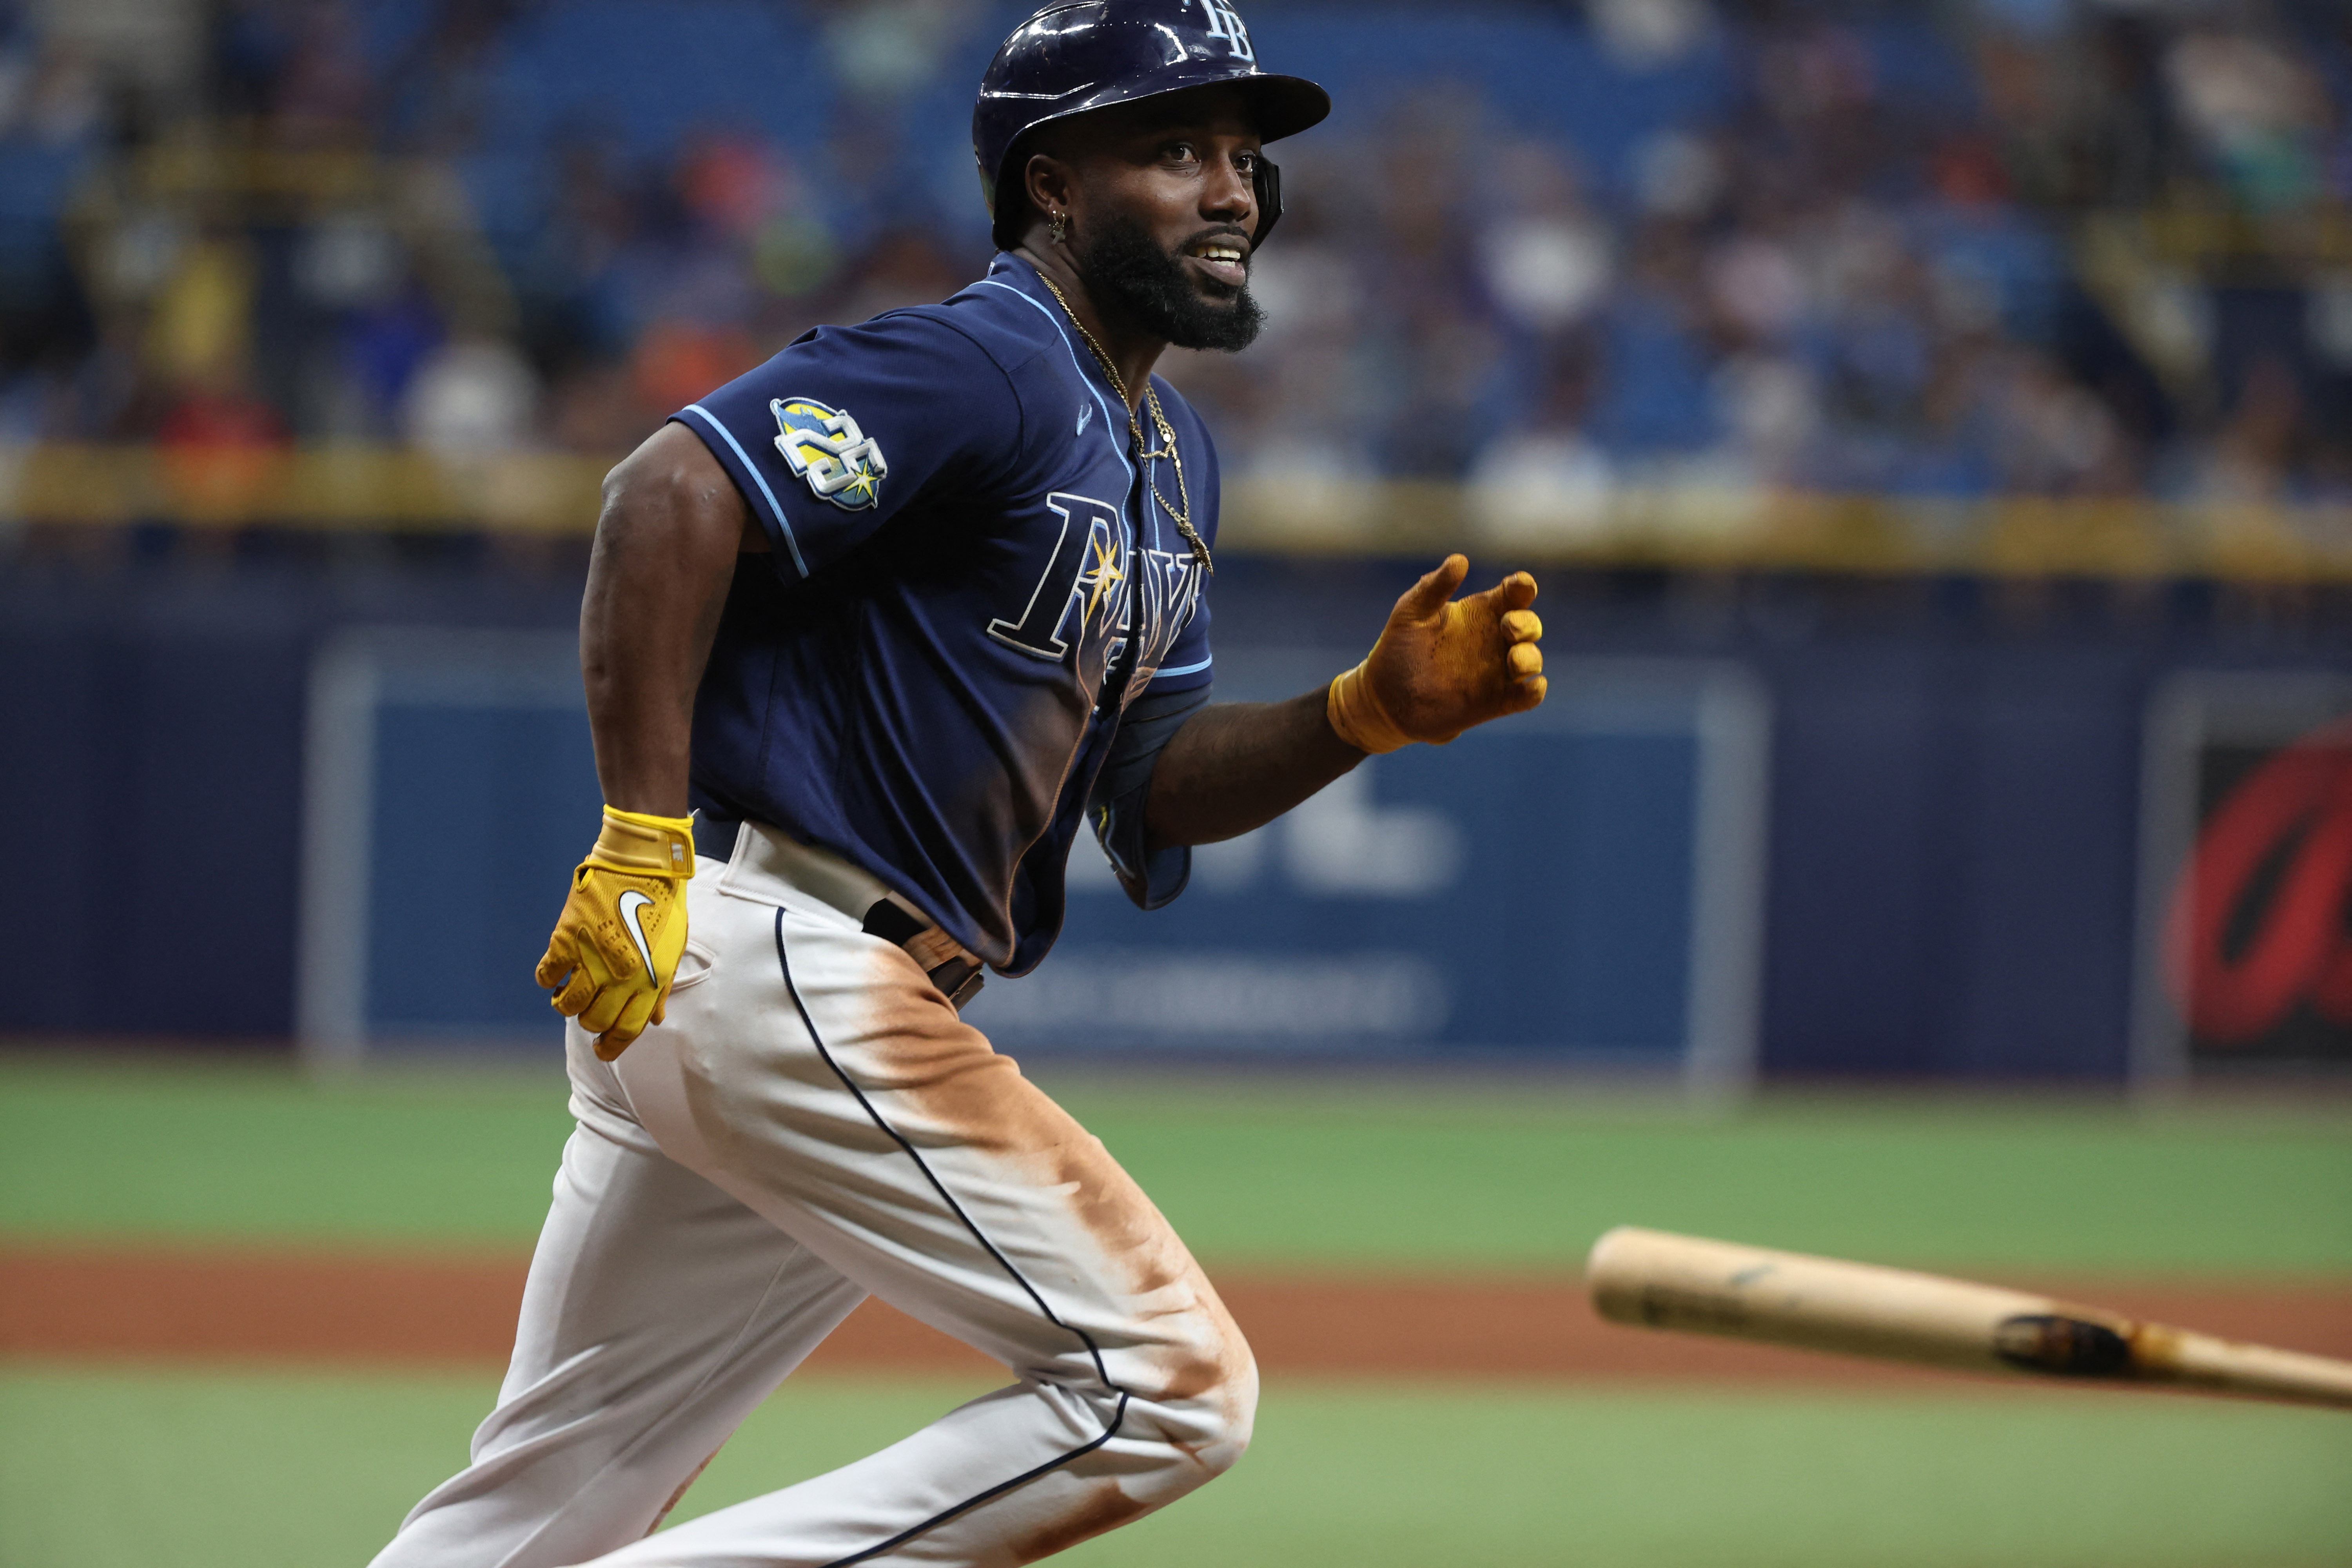 May 25, 2023; St. Petersburg, Florida, USA; Tampa Bay Rays left fielder Randy Arozarena (56) reacts after hitting a RBI single against the Toronto Blue Jays during the seventh inning at Tropicana Field. Mandatory Credit: Kim Klement-USA TODAY Sports